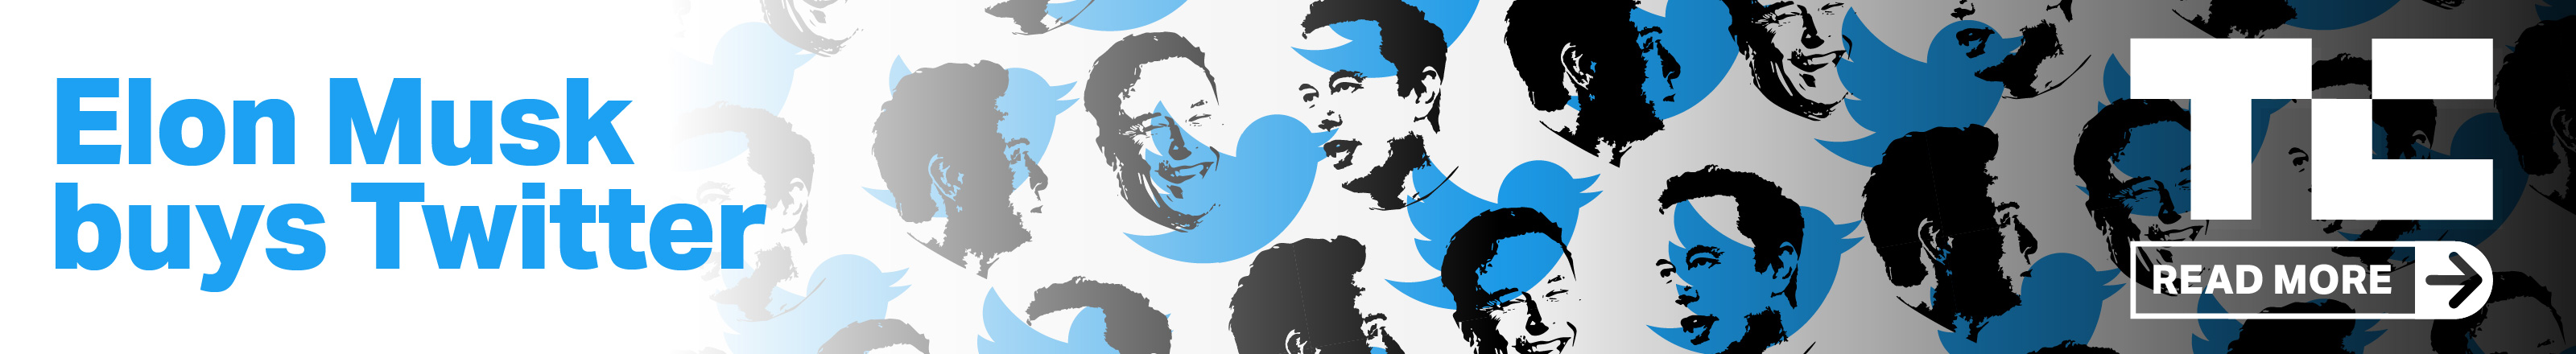 Read more about Elon Musk buying Twitter on TechCrunch